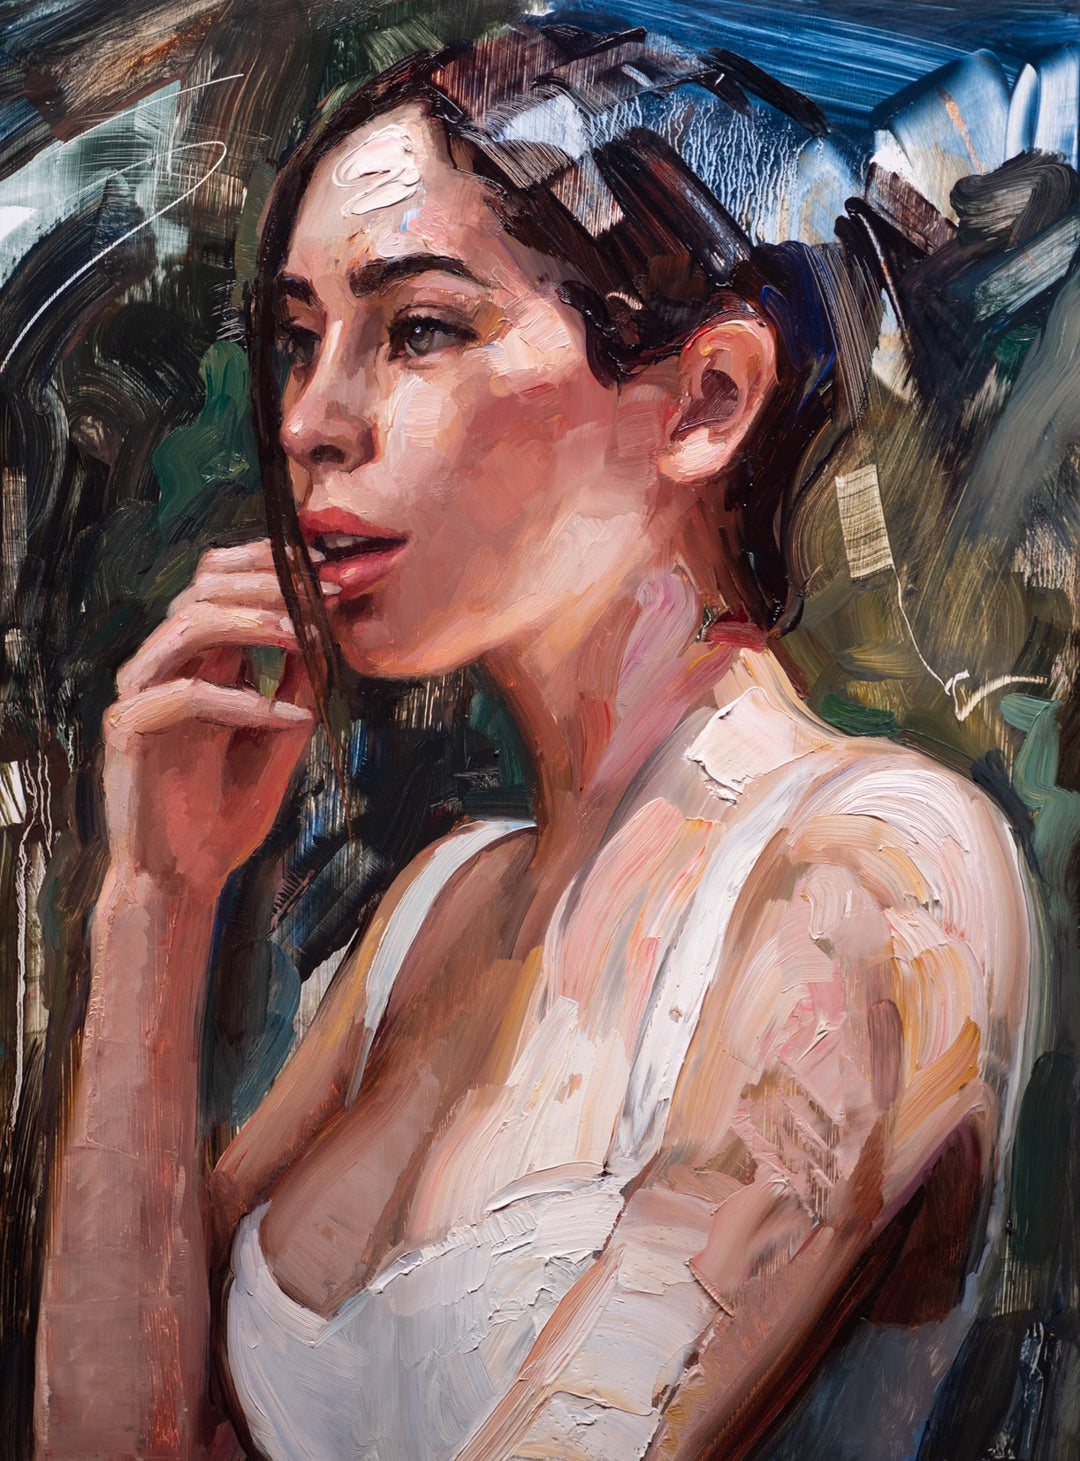 An oil painting of a woman with her hand on her chin, created by the artist Matt Talbert - "True Love Waits".